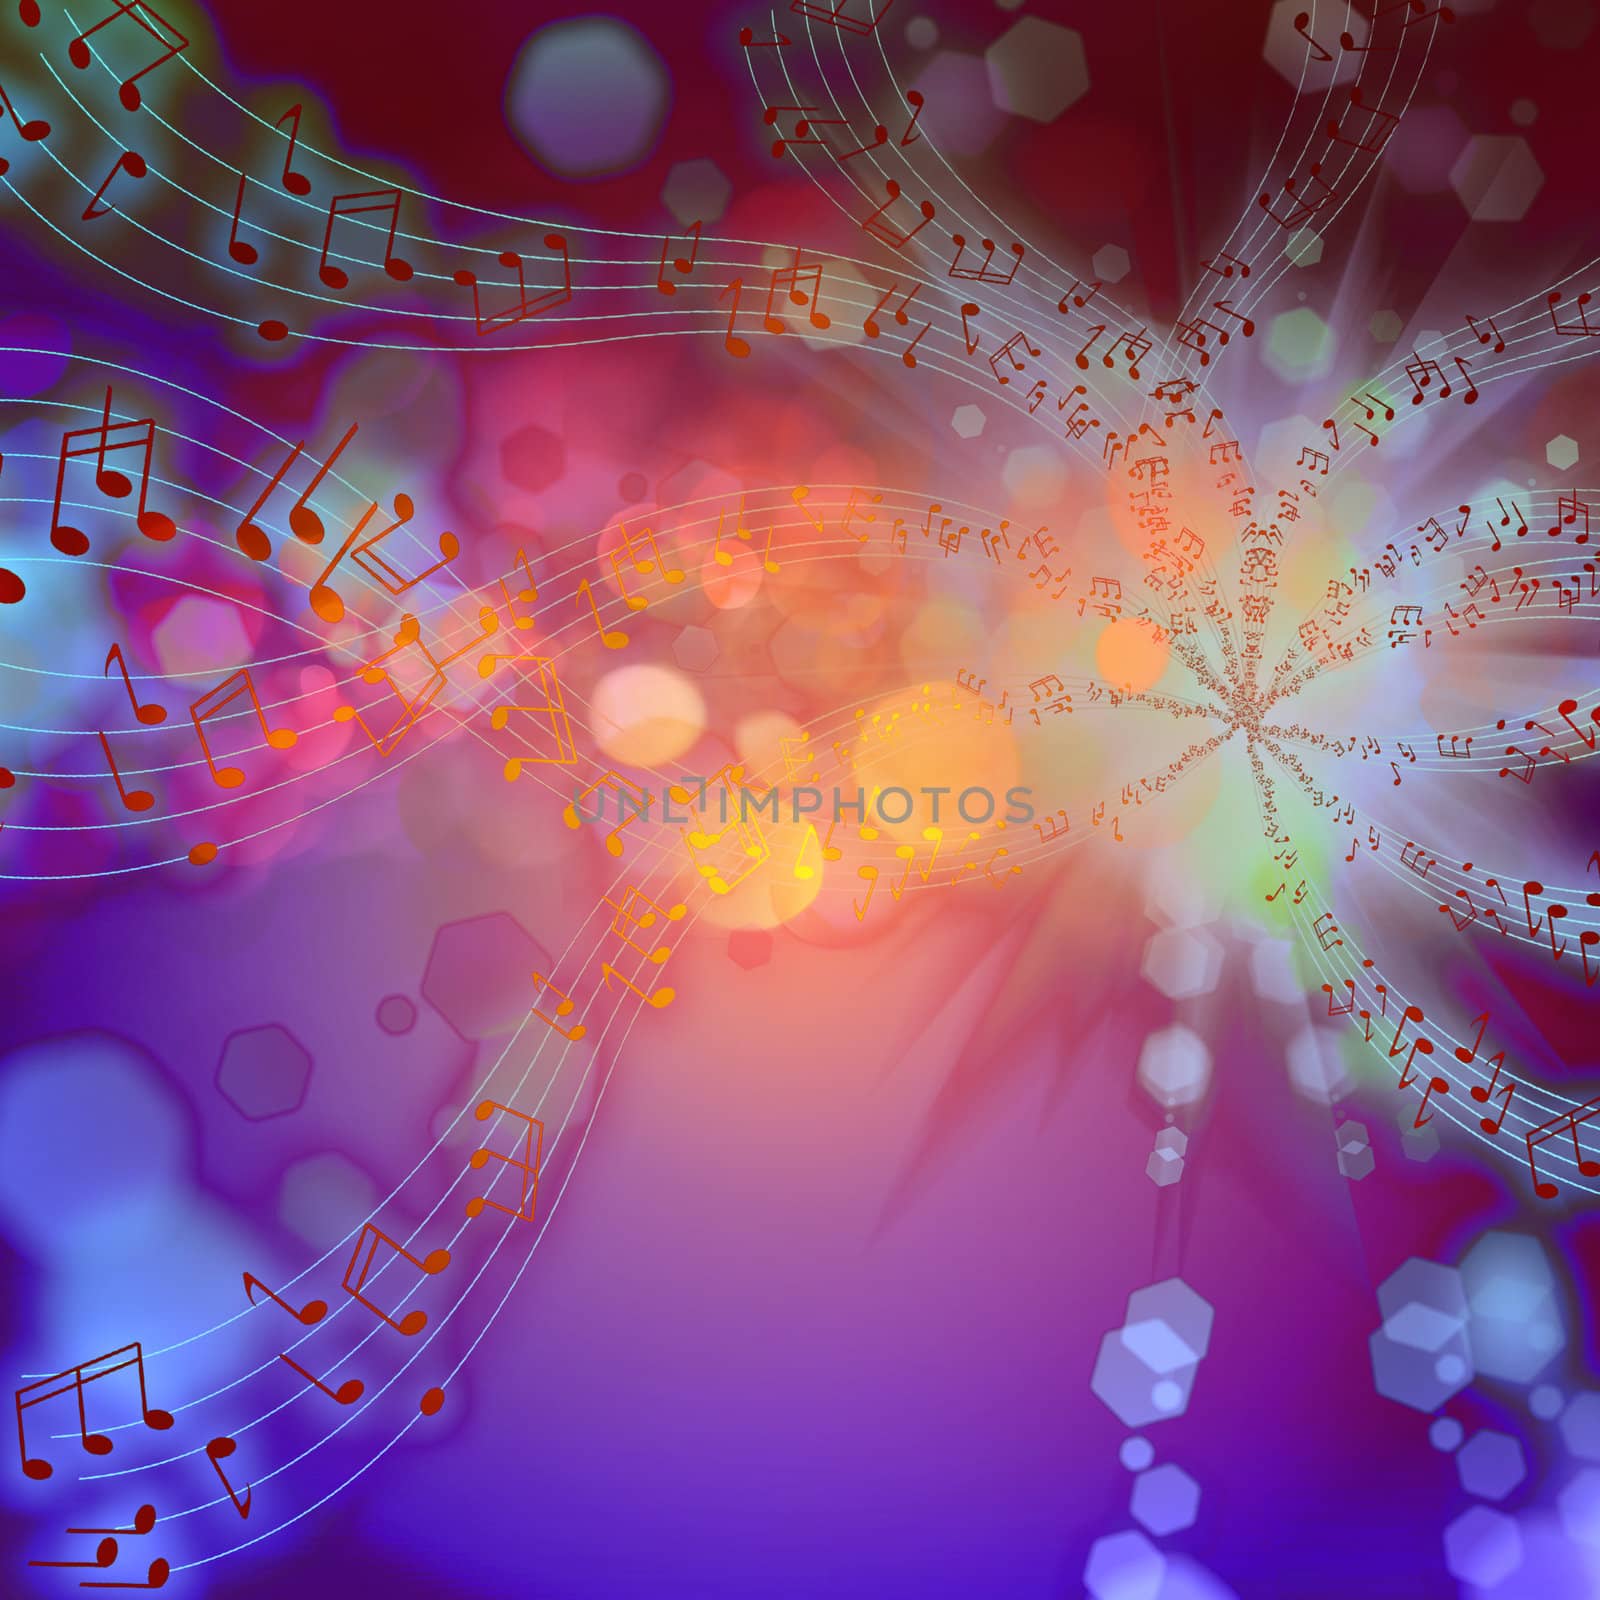 The musical abstract background